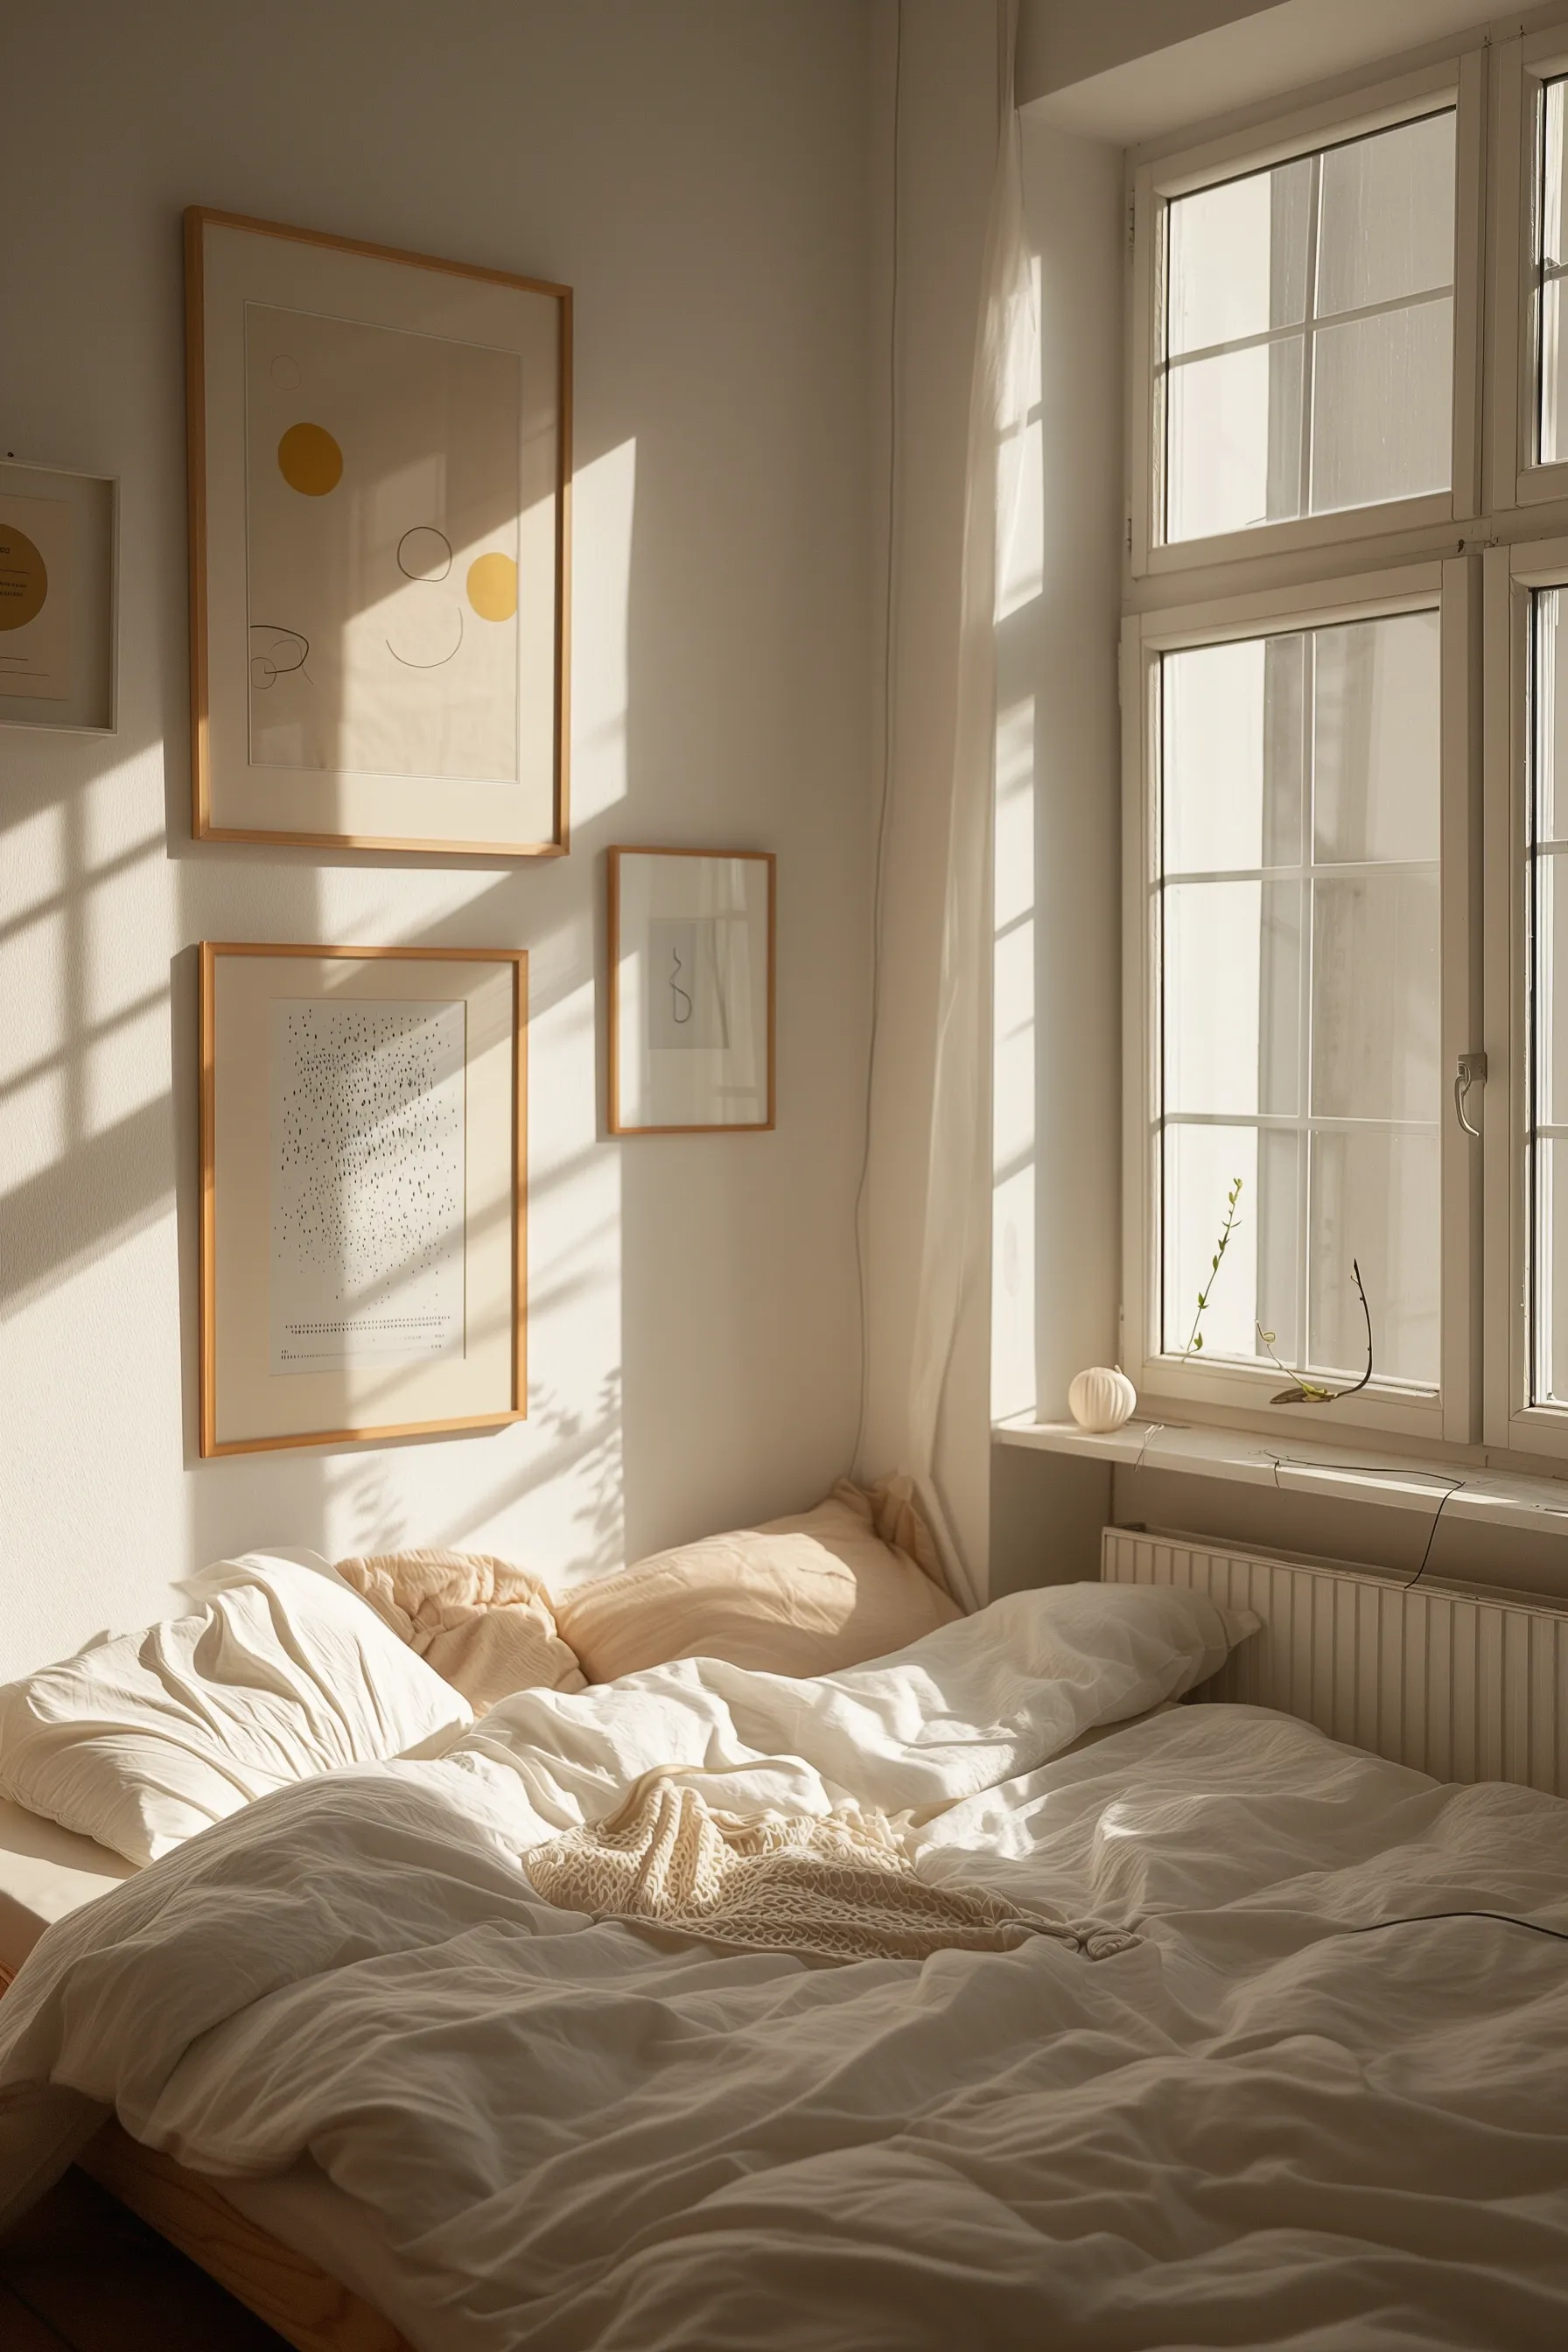 A white bedroom with wall art